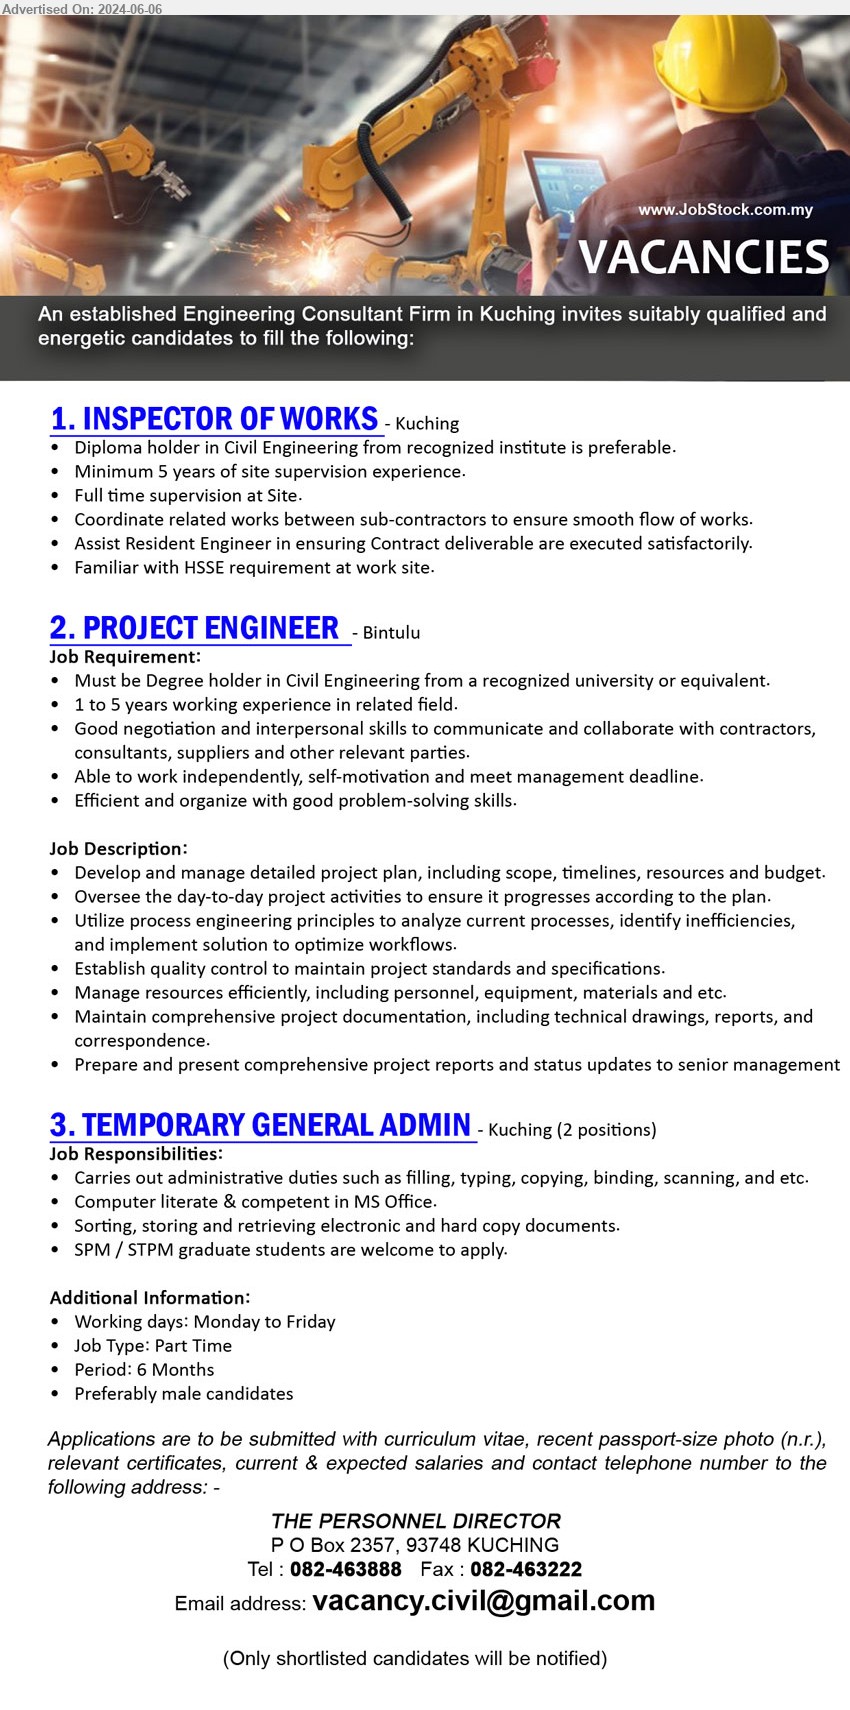 ADVERTISER - 1. INSPECTOR OF WORKS (Kuching), Diploma holder in Civil Engineering from recognized institute is preferable, 5 yrs. exp.,...
2. PROJECT ENGINEER (Bintulu), Degree holder in Civil Engineering, 1 to 5 years working experience in related field,...
3. TEMPORARY GENERAL ADMIN  (Kuching), Carries out administrative duties such as filling, typing, copying, binding, scanning,,...
Call 082-463888 / Email resume to ...